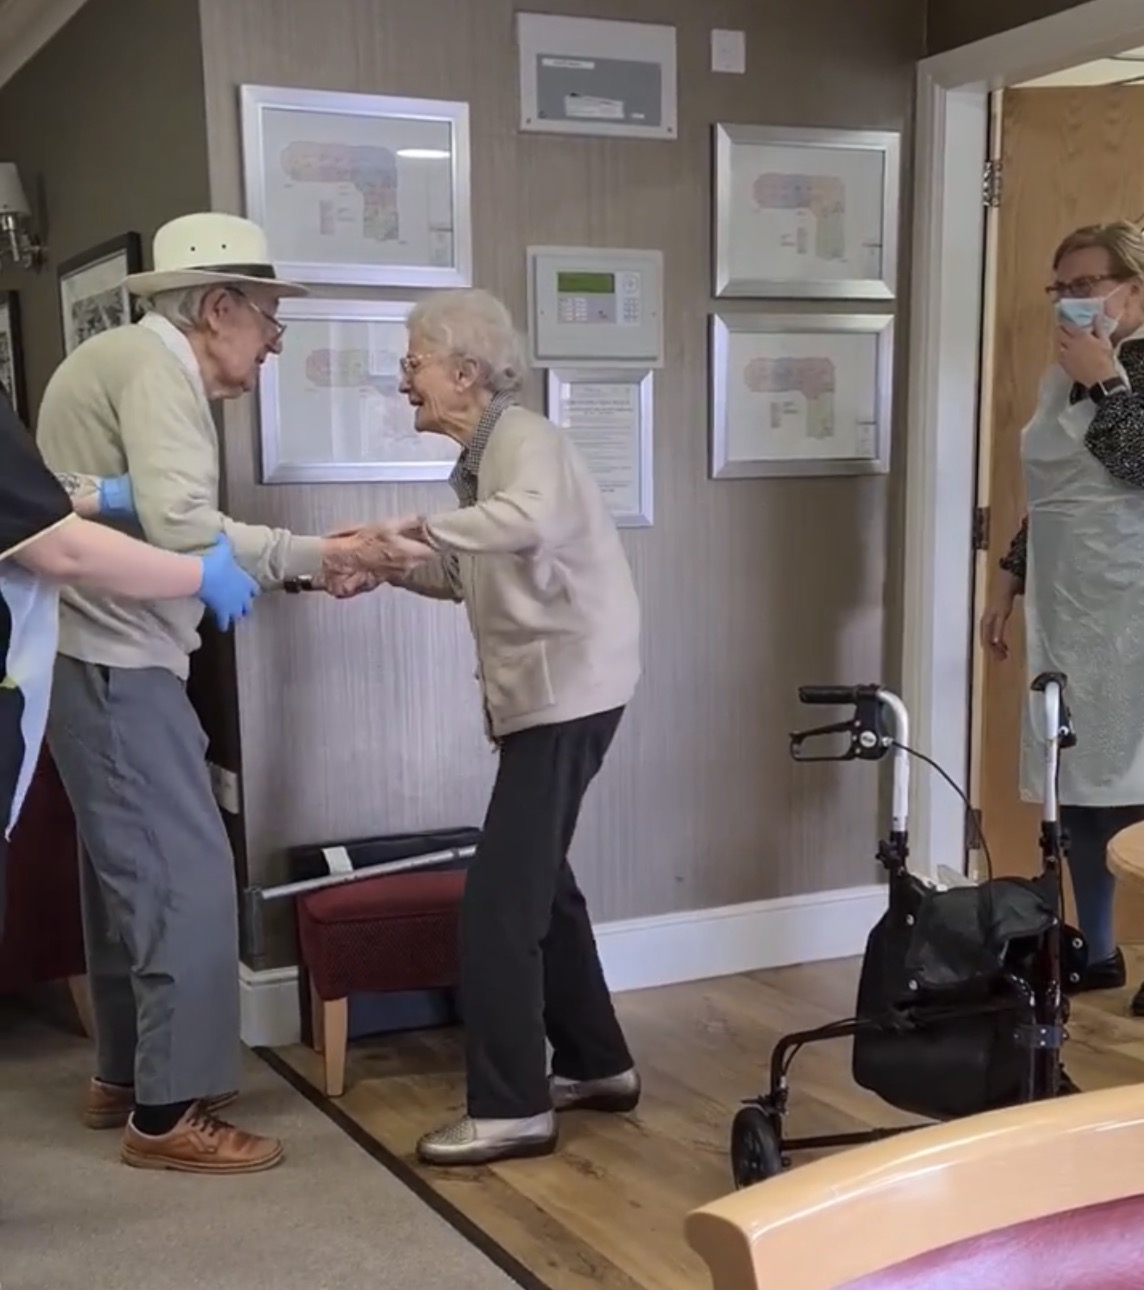 This is the heart-warming moment an elderly married couple reunited after husband Gordon decided to move in to the same care home as his beloved wife Mary.